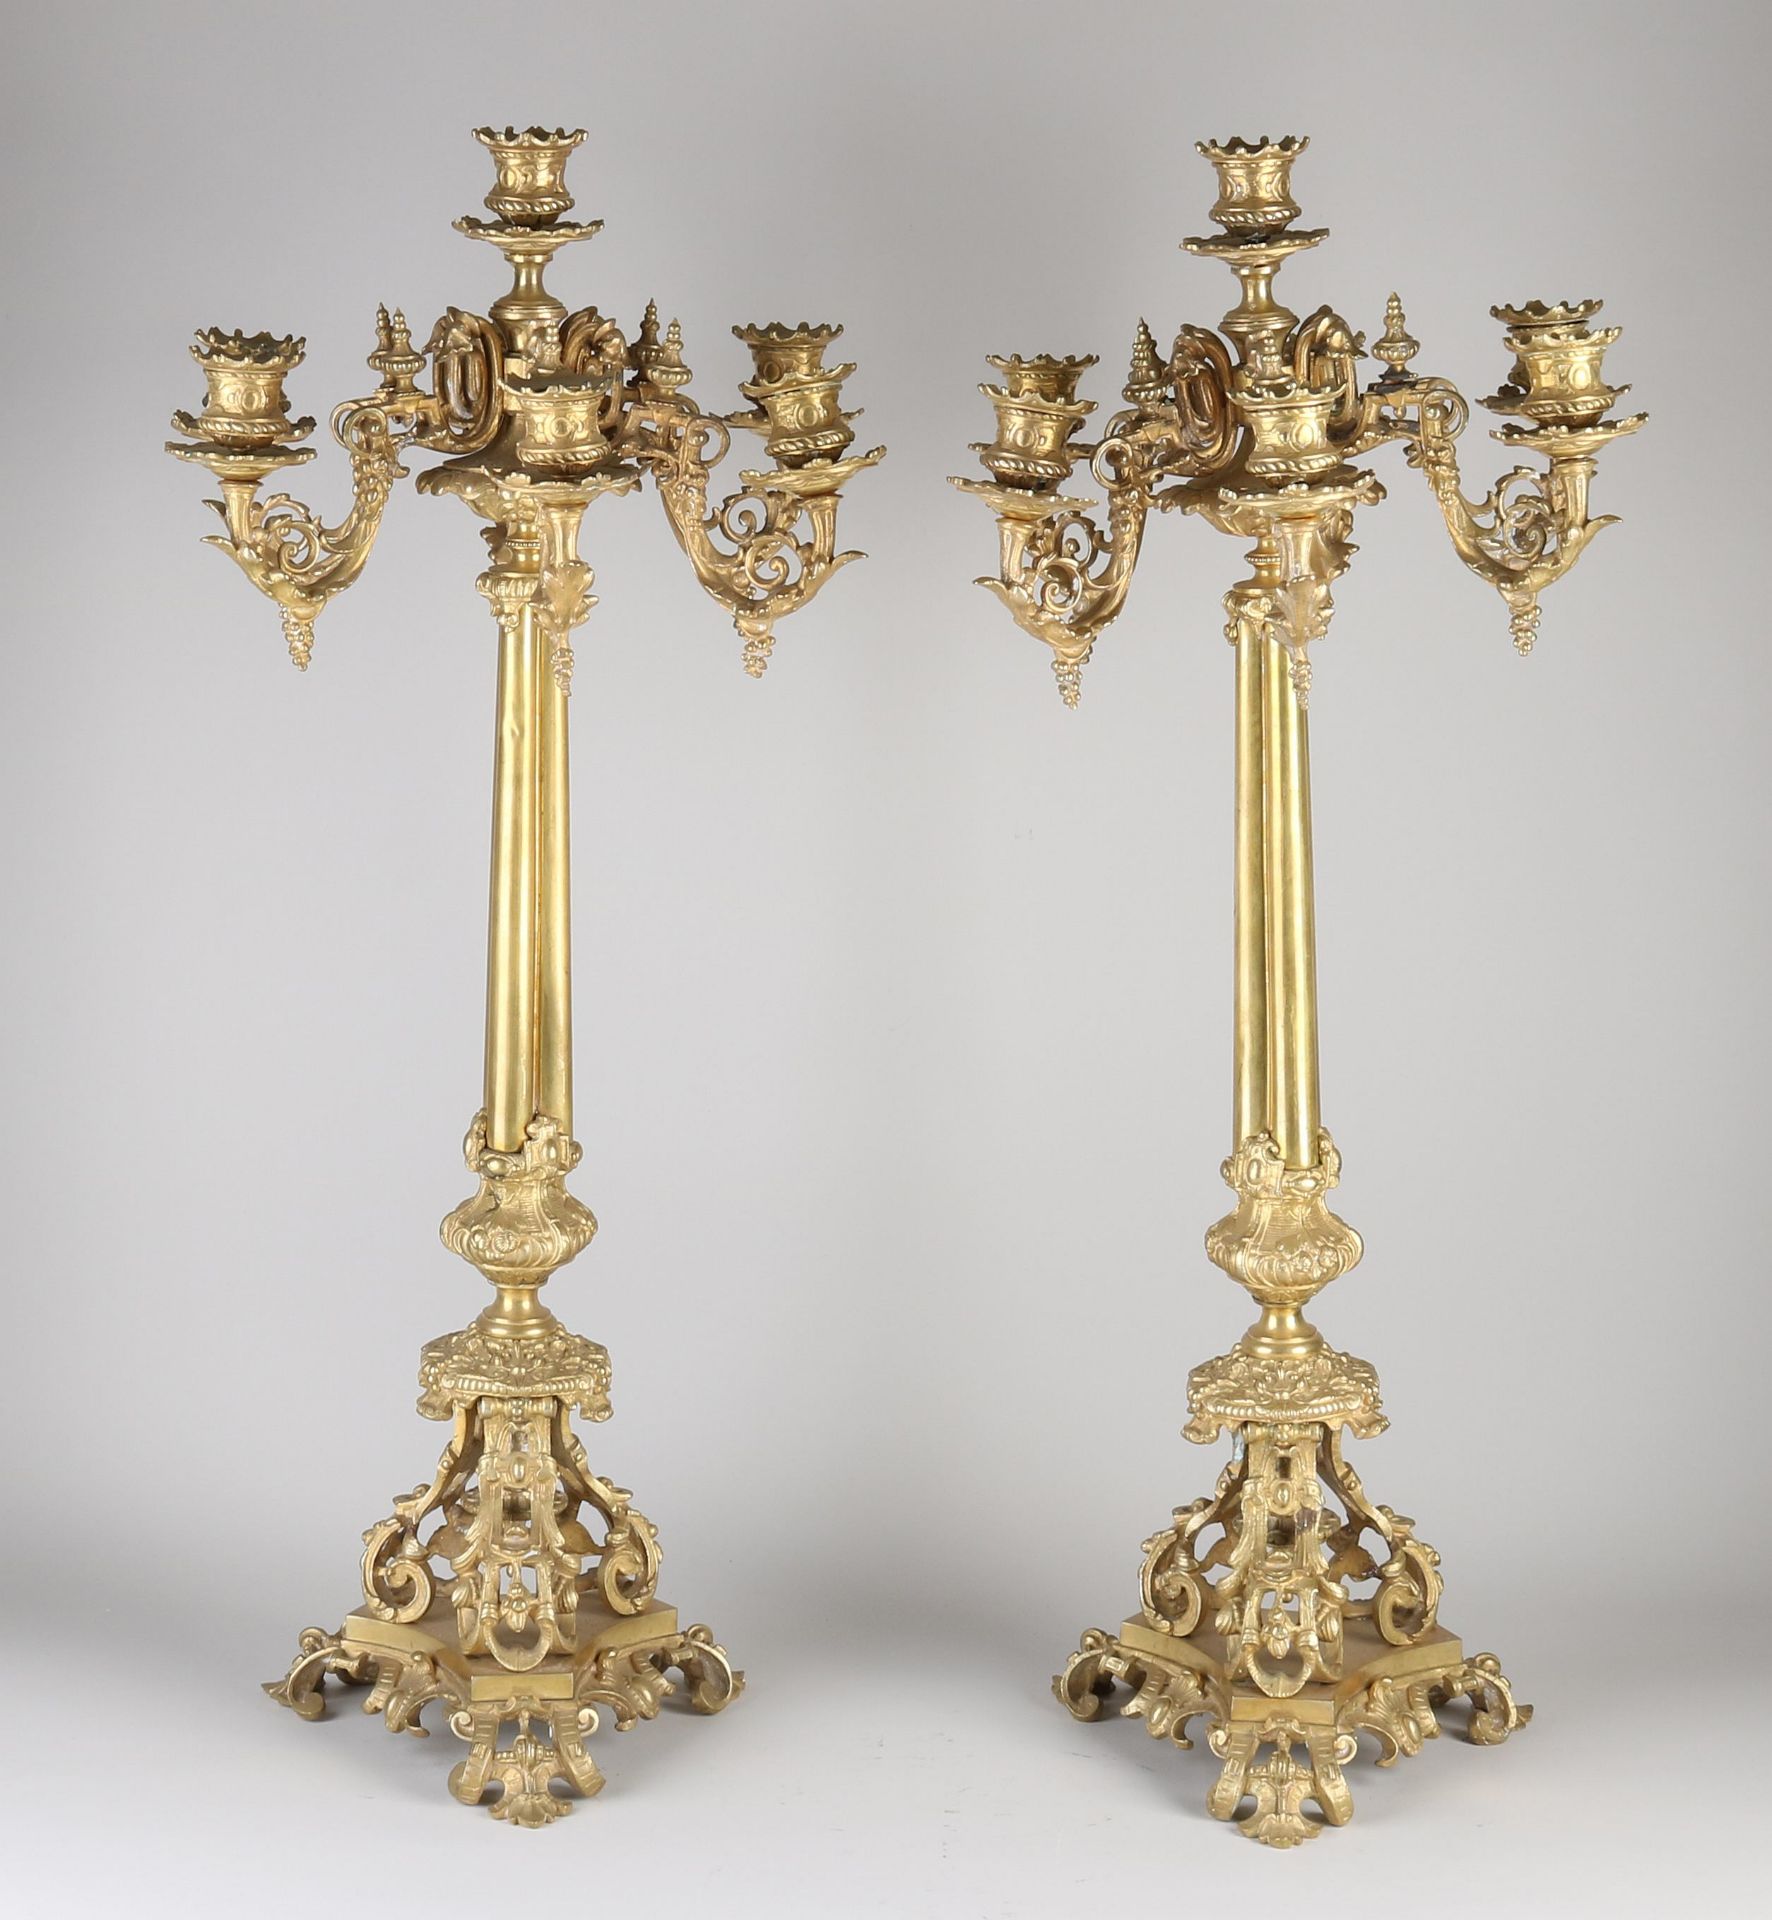 Two fire-gilded church candlesticks